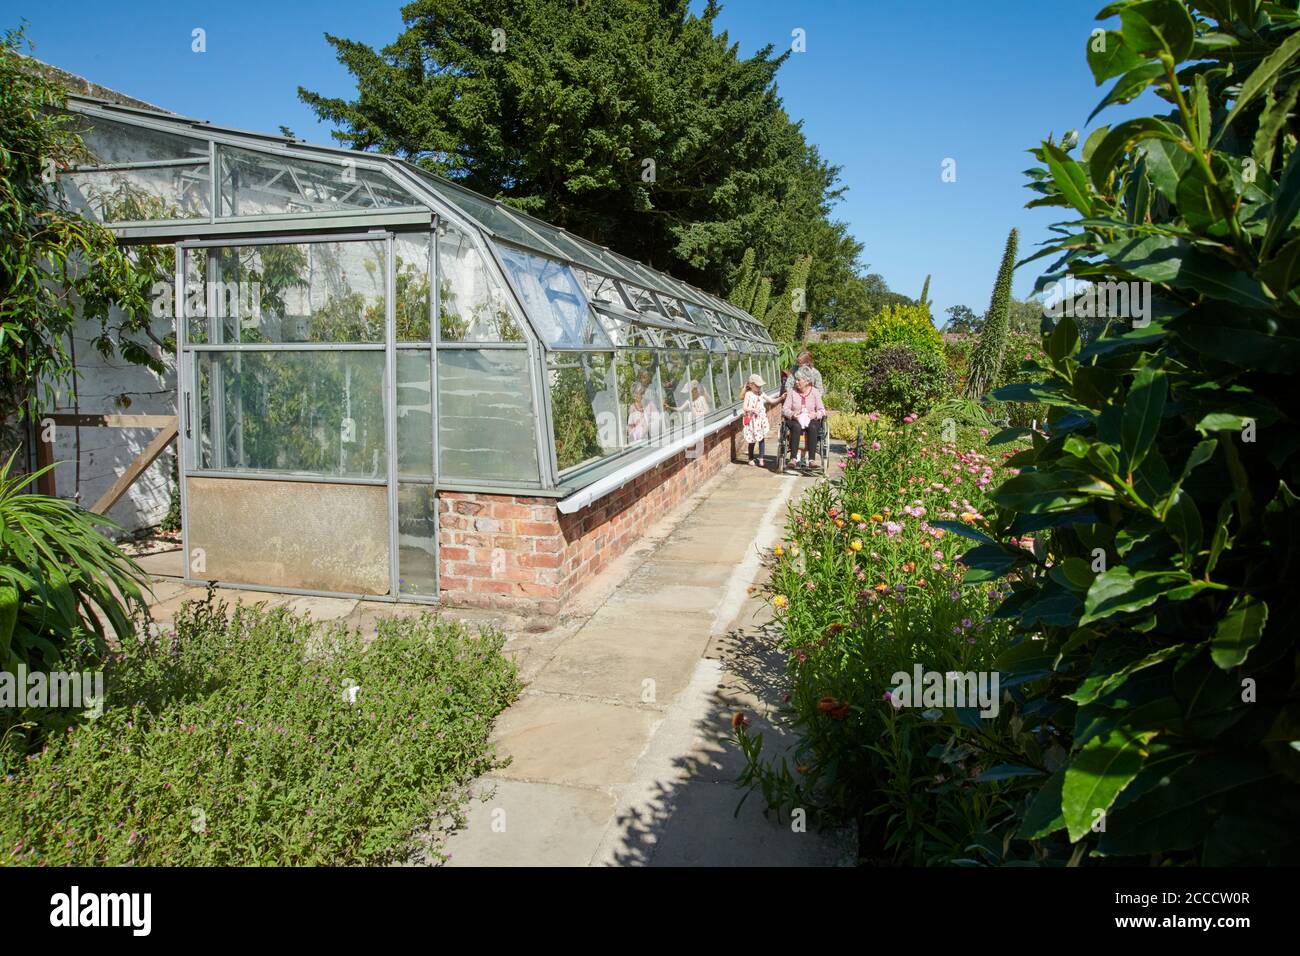 A beautiful summer walled garden border flowerbed display including various flowering plants and large south-facing greenhouse (Glasshouse) Stock Photo